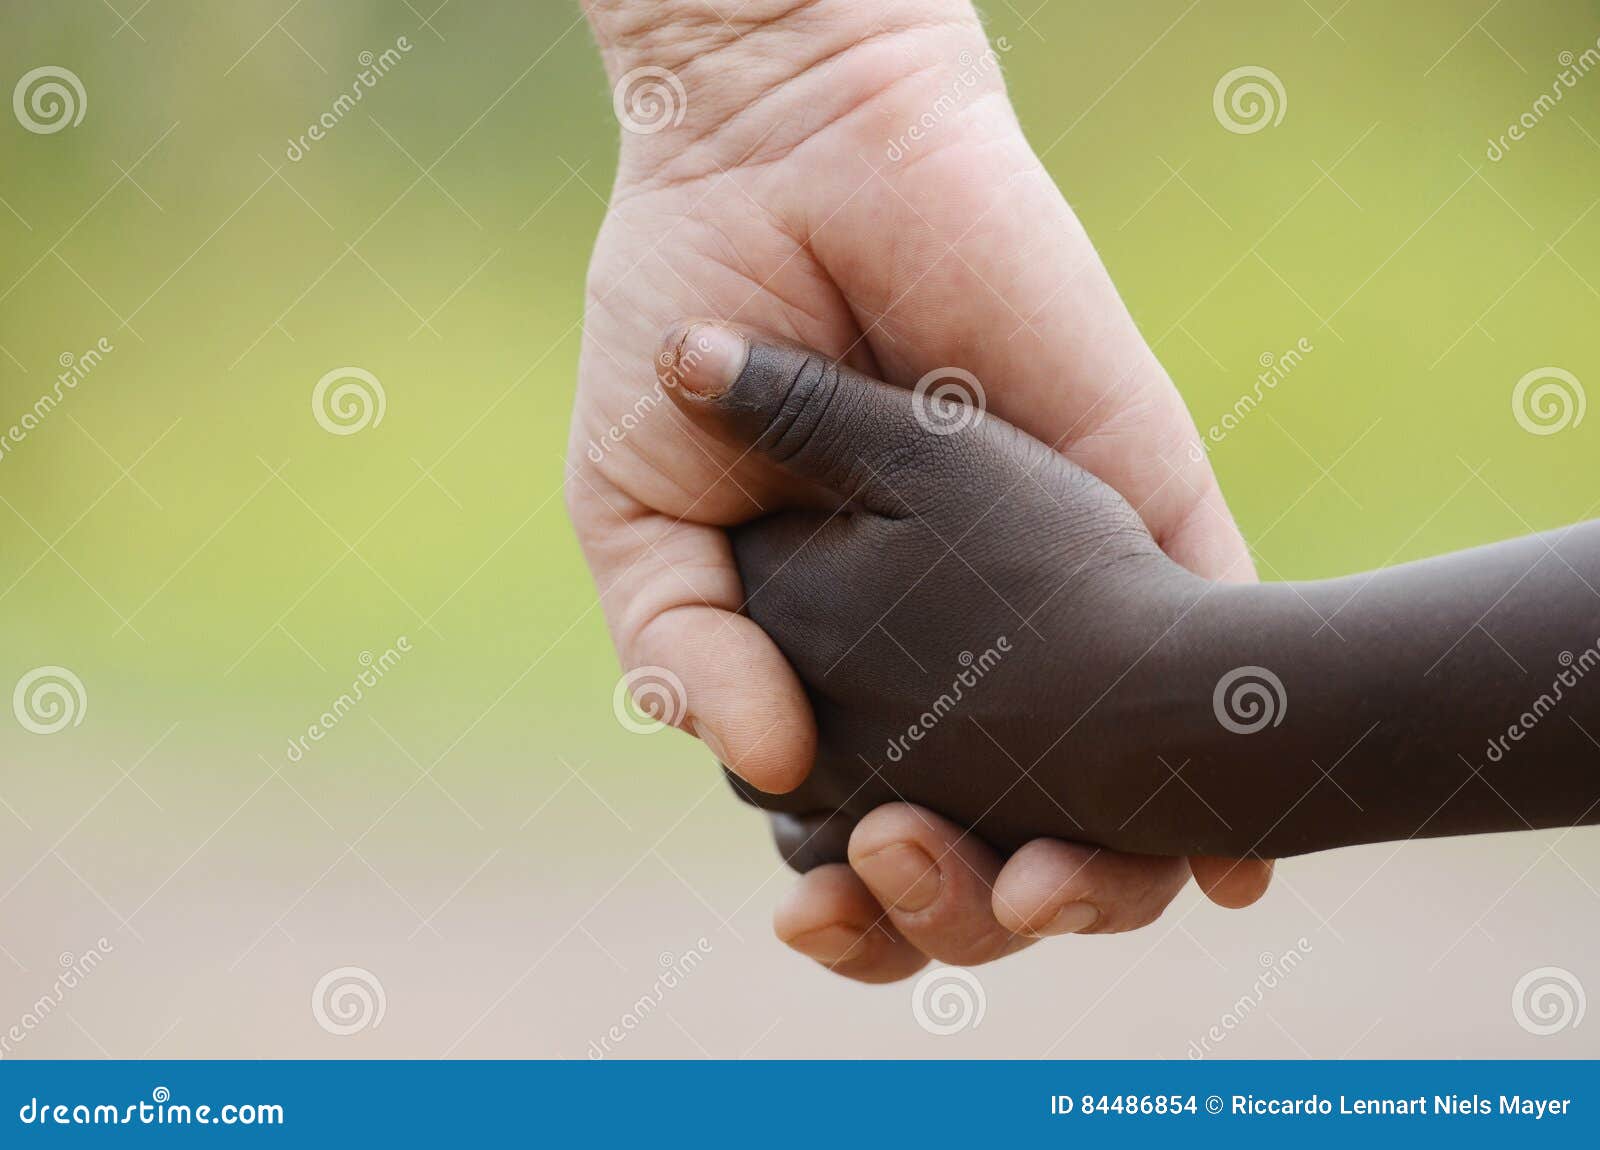 beautiful peace  - white woman black child holding hands.